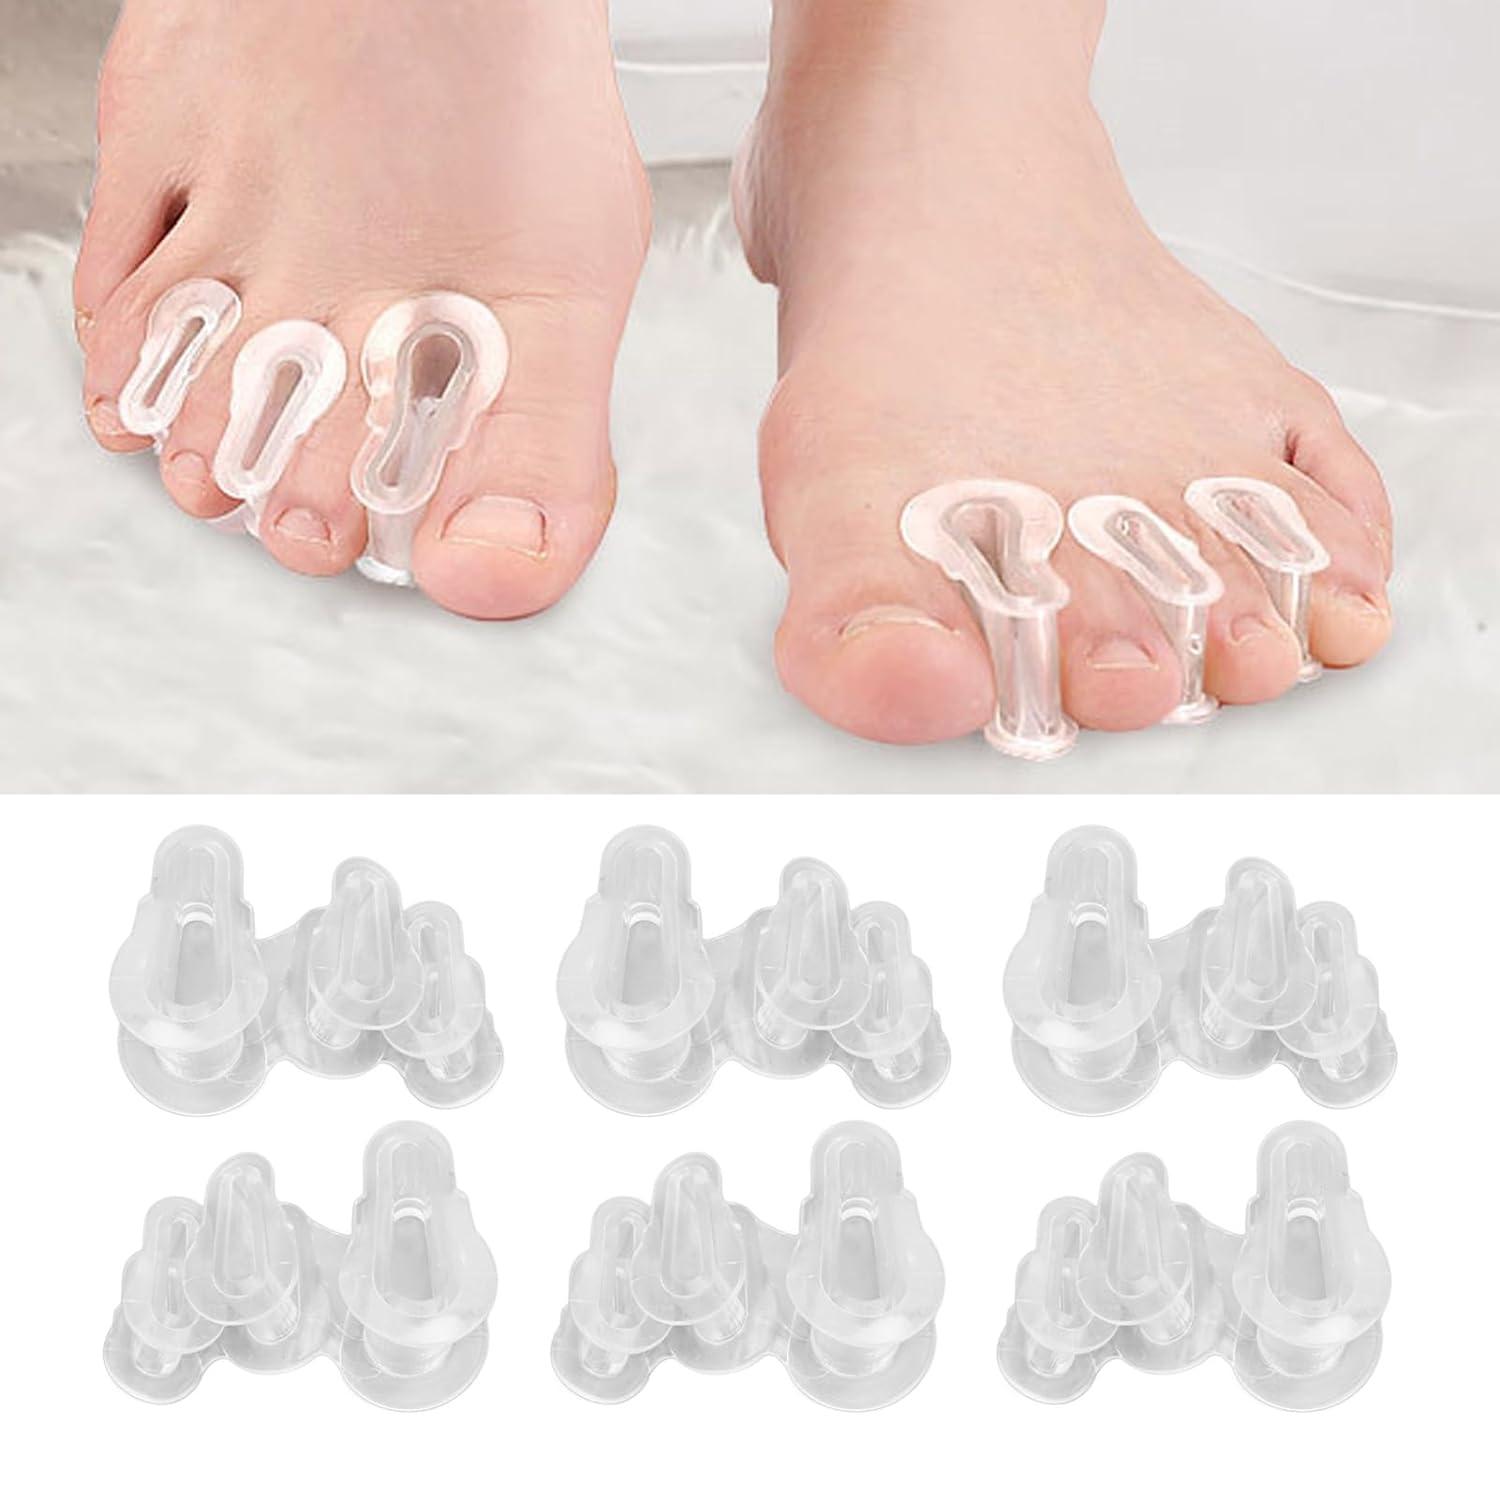 Silicone Hammertoe Corrector 3 Pairs Medical Grade Soft Hammer Toe Crest Pad  with 2 Separator Loops Maintain Straight Toes One Size Fits Most Support  Foot Odor Resistant